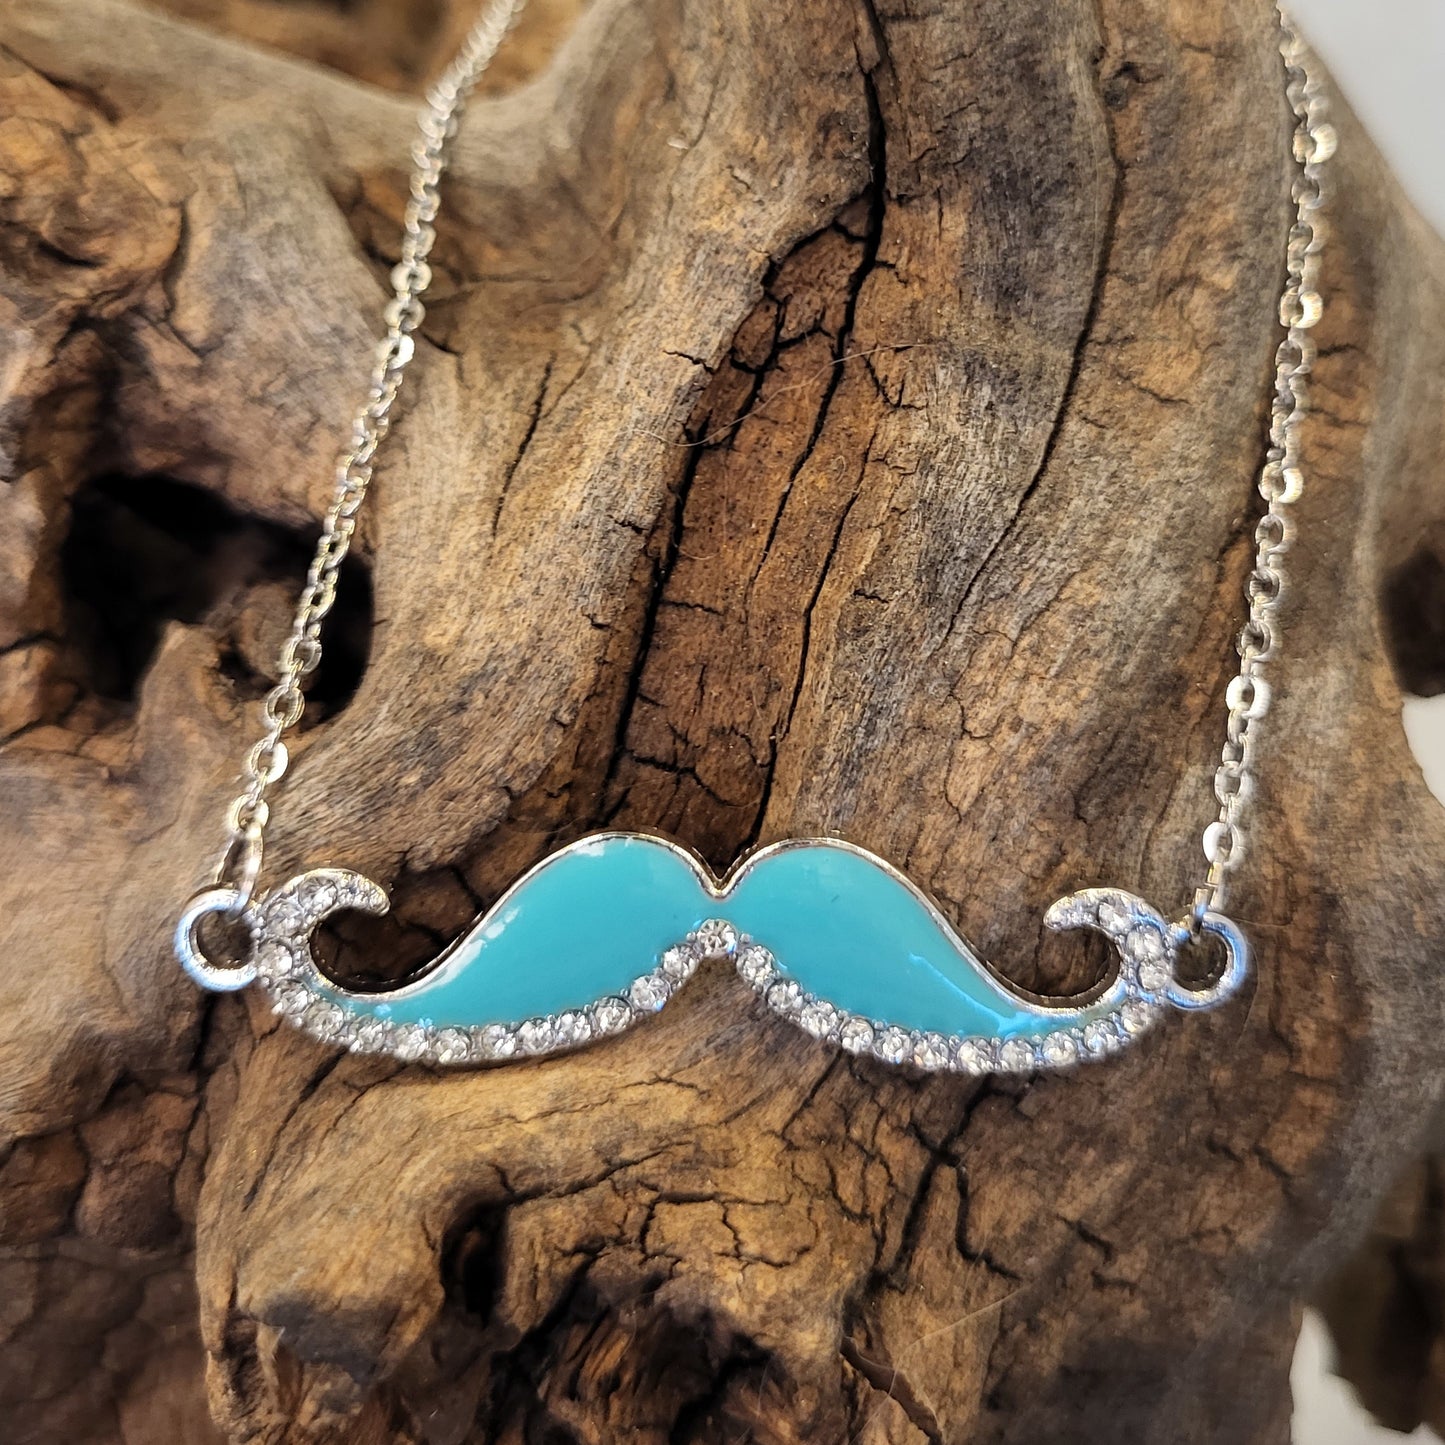 Mustache Necklaces | Jewelry and Accessories